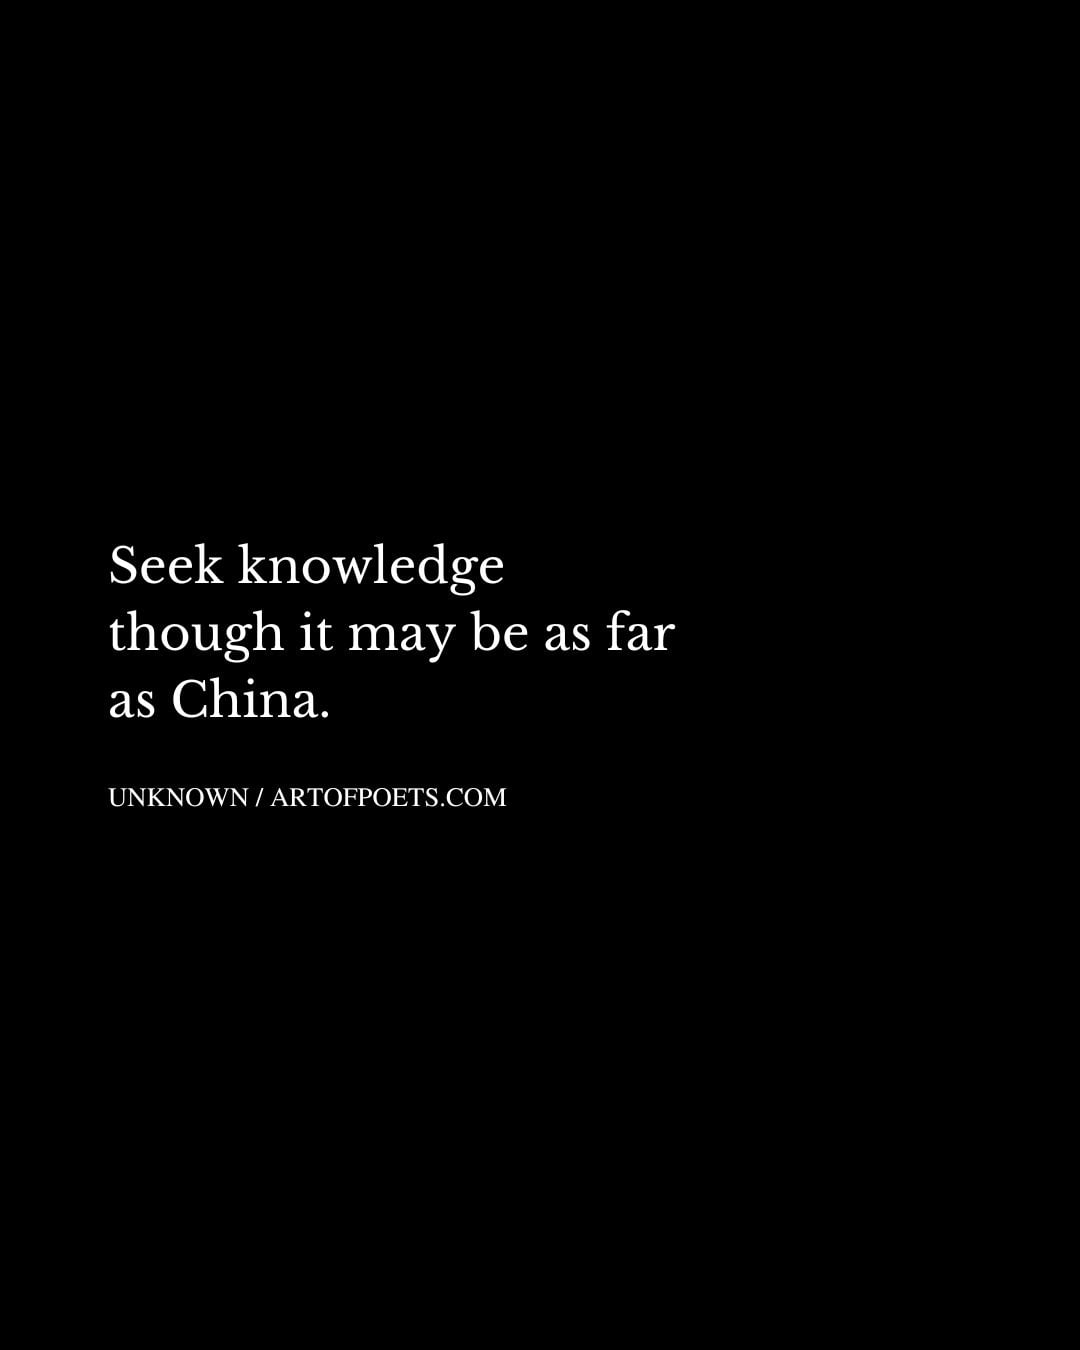 Seek knowledge though it may be as far as China